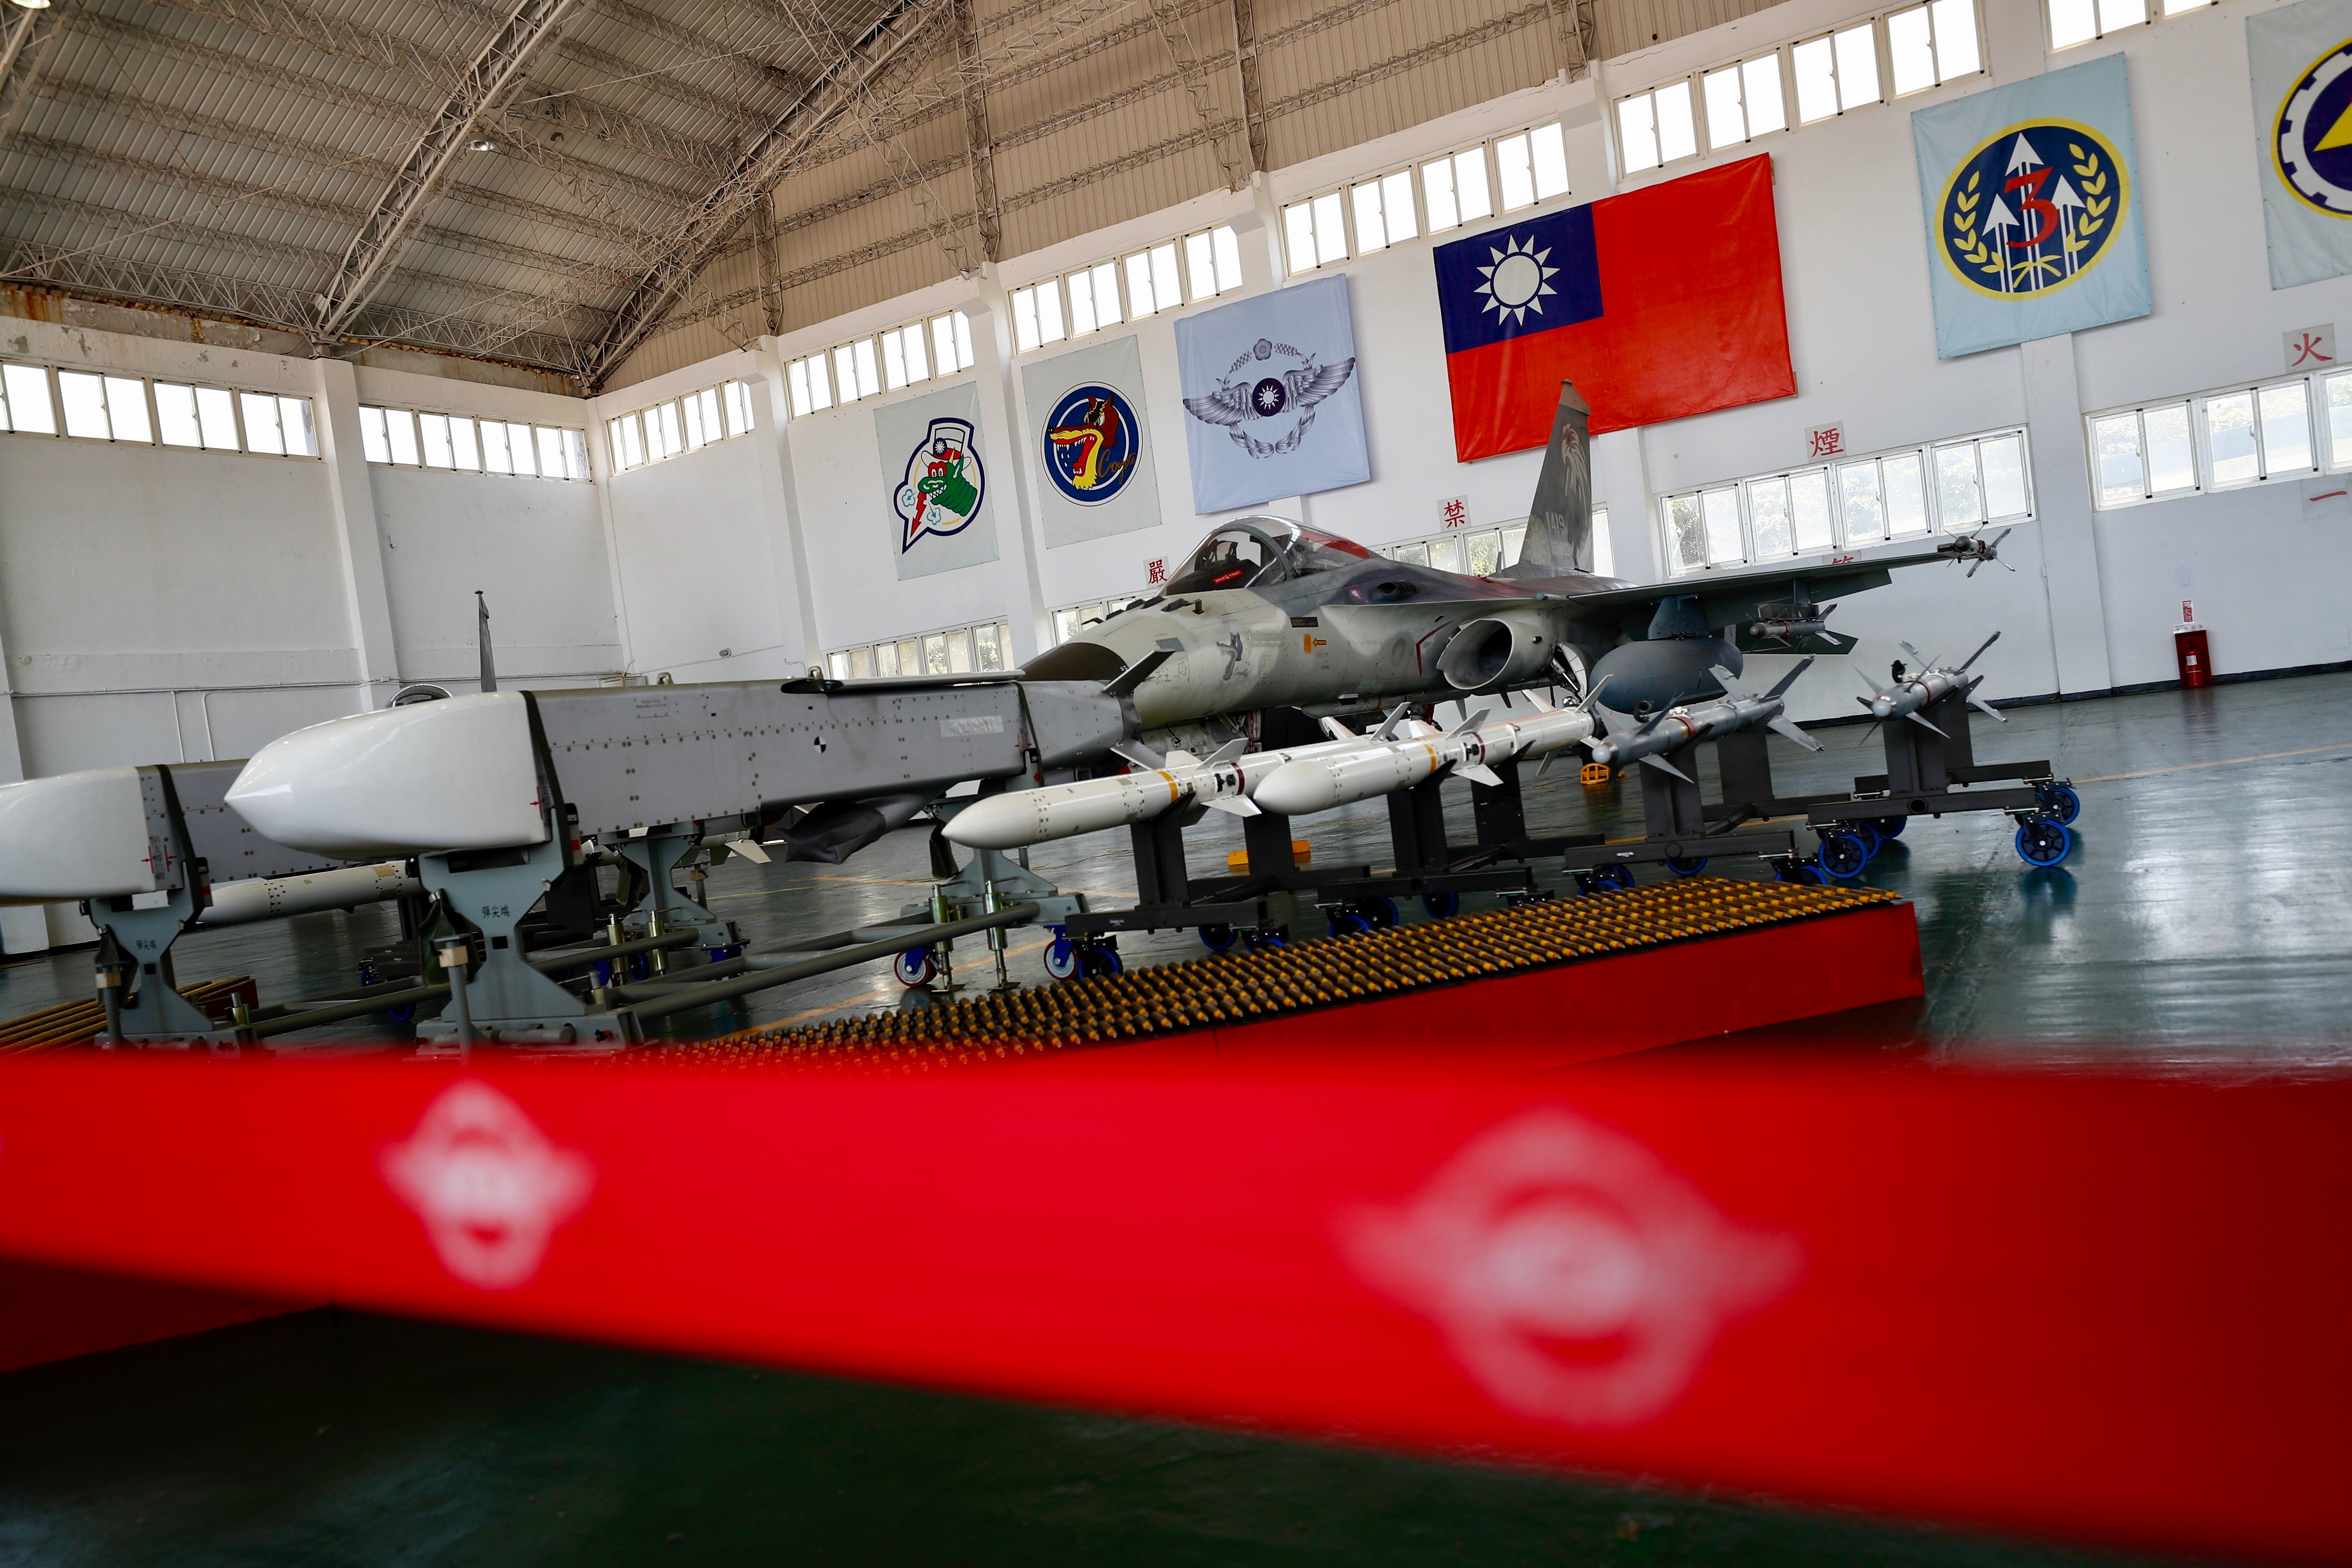 Taiwanese fighter jets at a military base in Penghu island, Taiwan, in September 2020